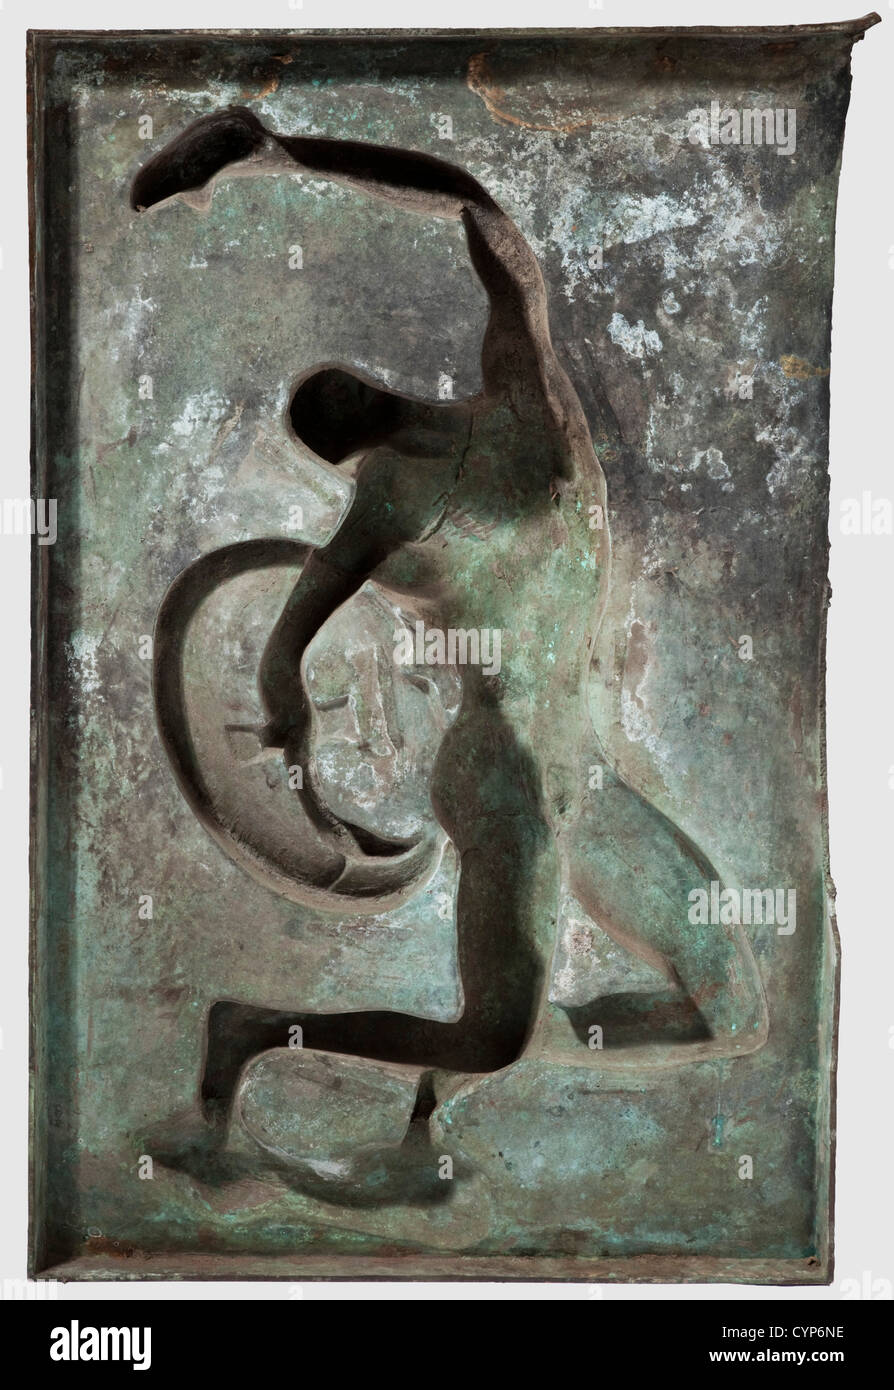 Arno Breker (1900 - 1991) - a relief in bronze 'Opfer' (victim), 1940, At the lower right signed 'Arno Breker', at the base workshop's signature 'Alexis Rudier Fondeur Paris', dark green, slightly spotted patina, the base with damage on the left side (67 cm are missing), the tip of the nose sli historic, historical, people, 1930s, 20th century, fine arts, art, NS, National Socialism, Nazism, Third Reich, German Reich, Germany, National Socialist, Nazi, Nazi period, object, objects, stills, clipping, clippings, cut out, cut-out, cut-outs, Additional-Rights-Clearences-Not Available Stock Photo